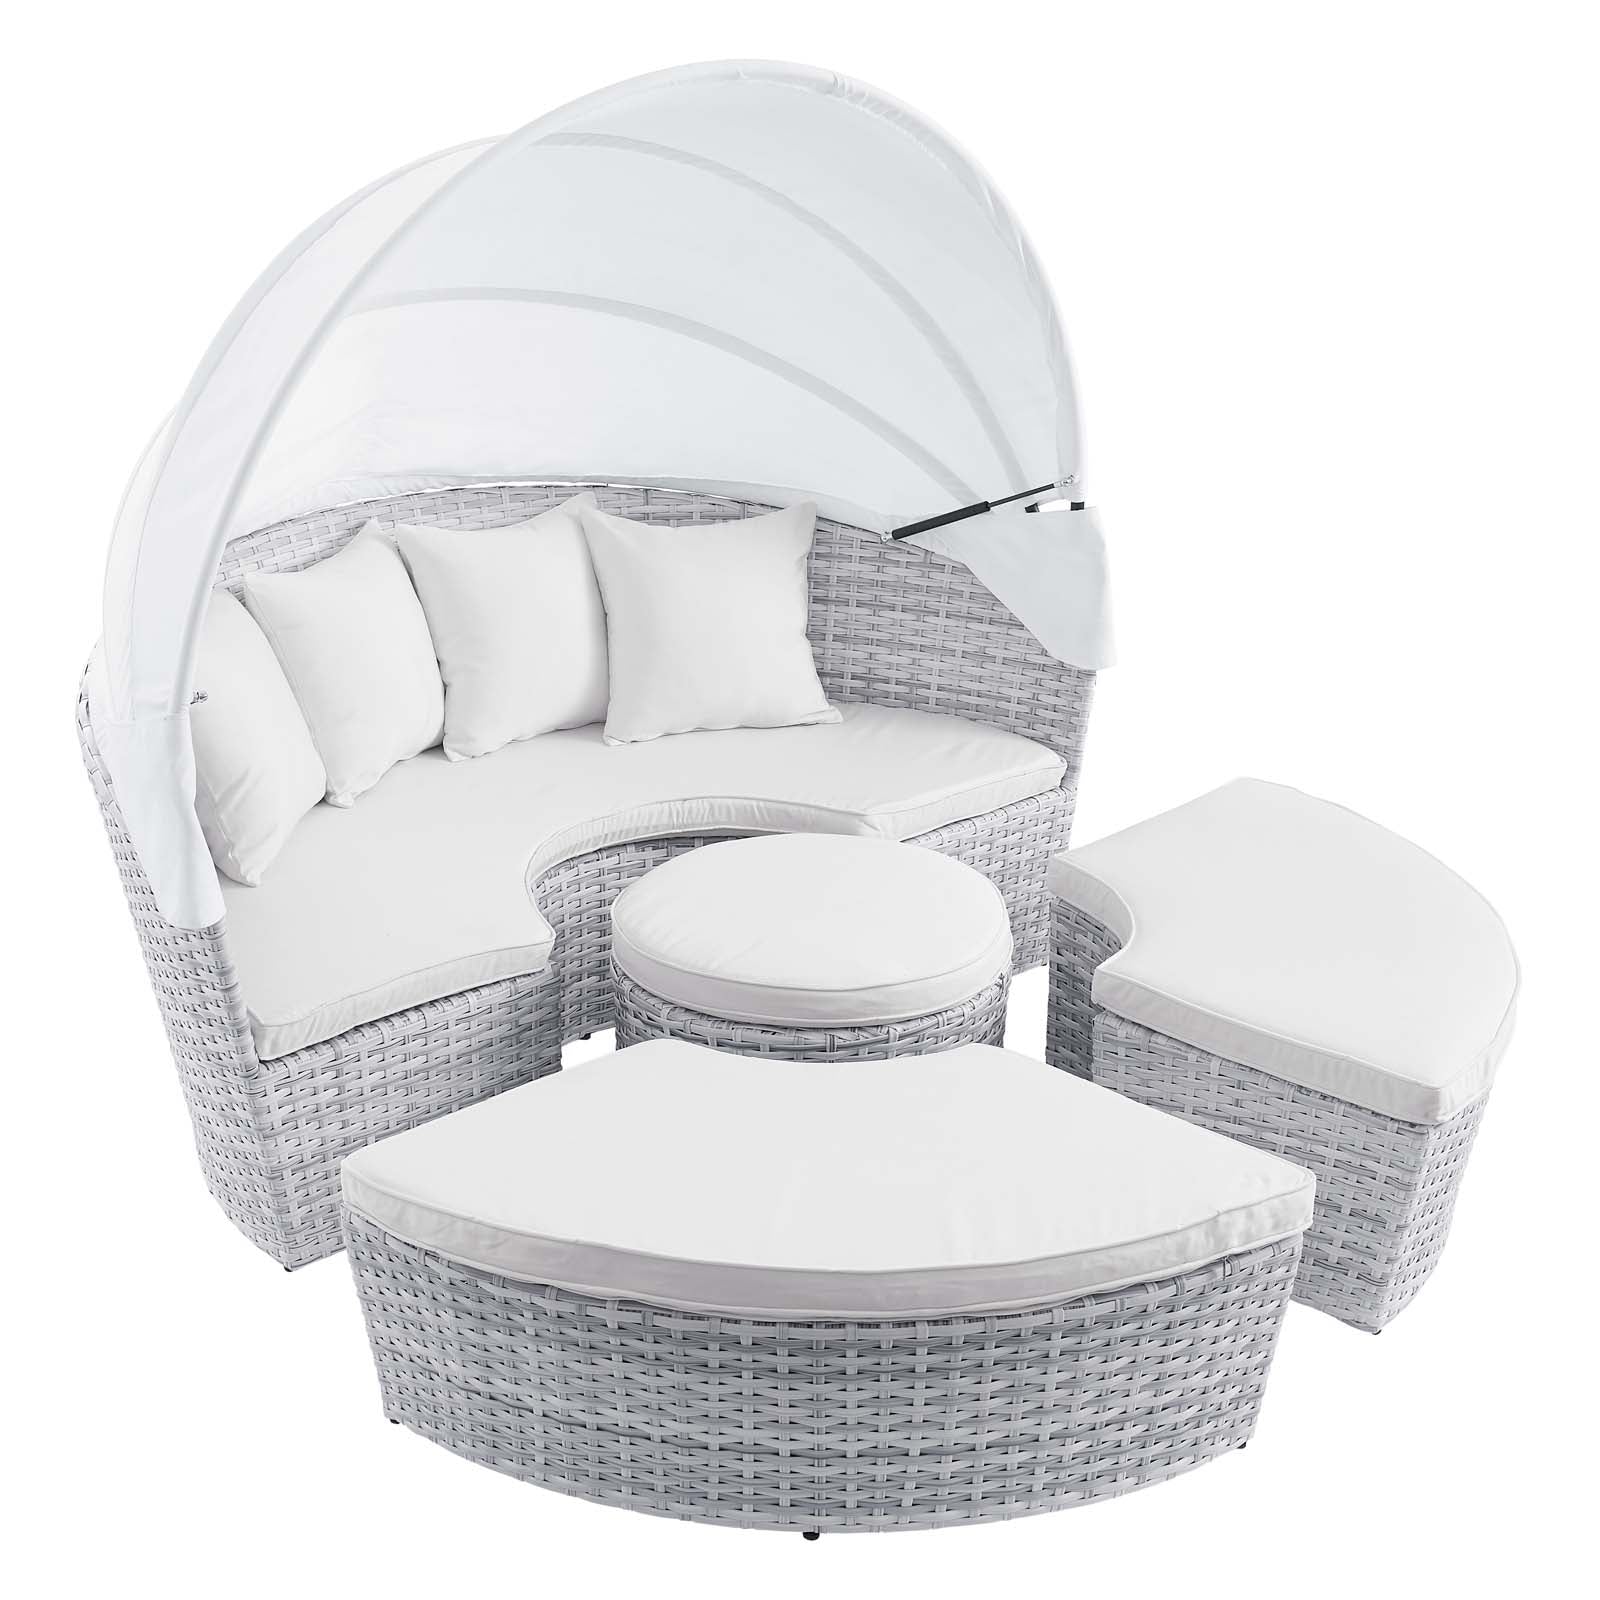 Scottsdale Canopy Outdoor Patio Daybed - East Shore Modern Home Furnishings